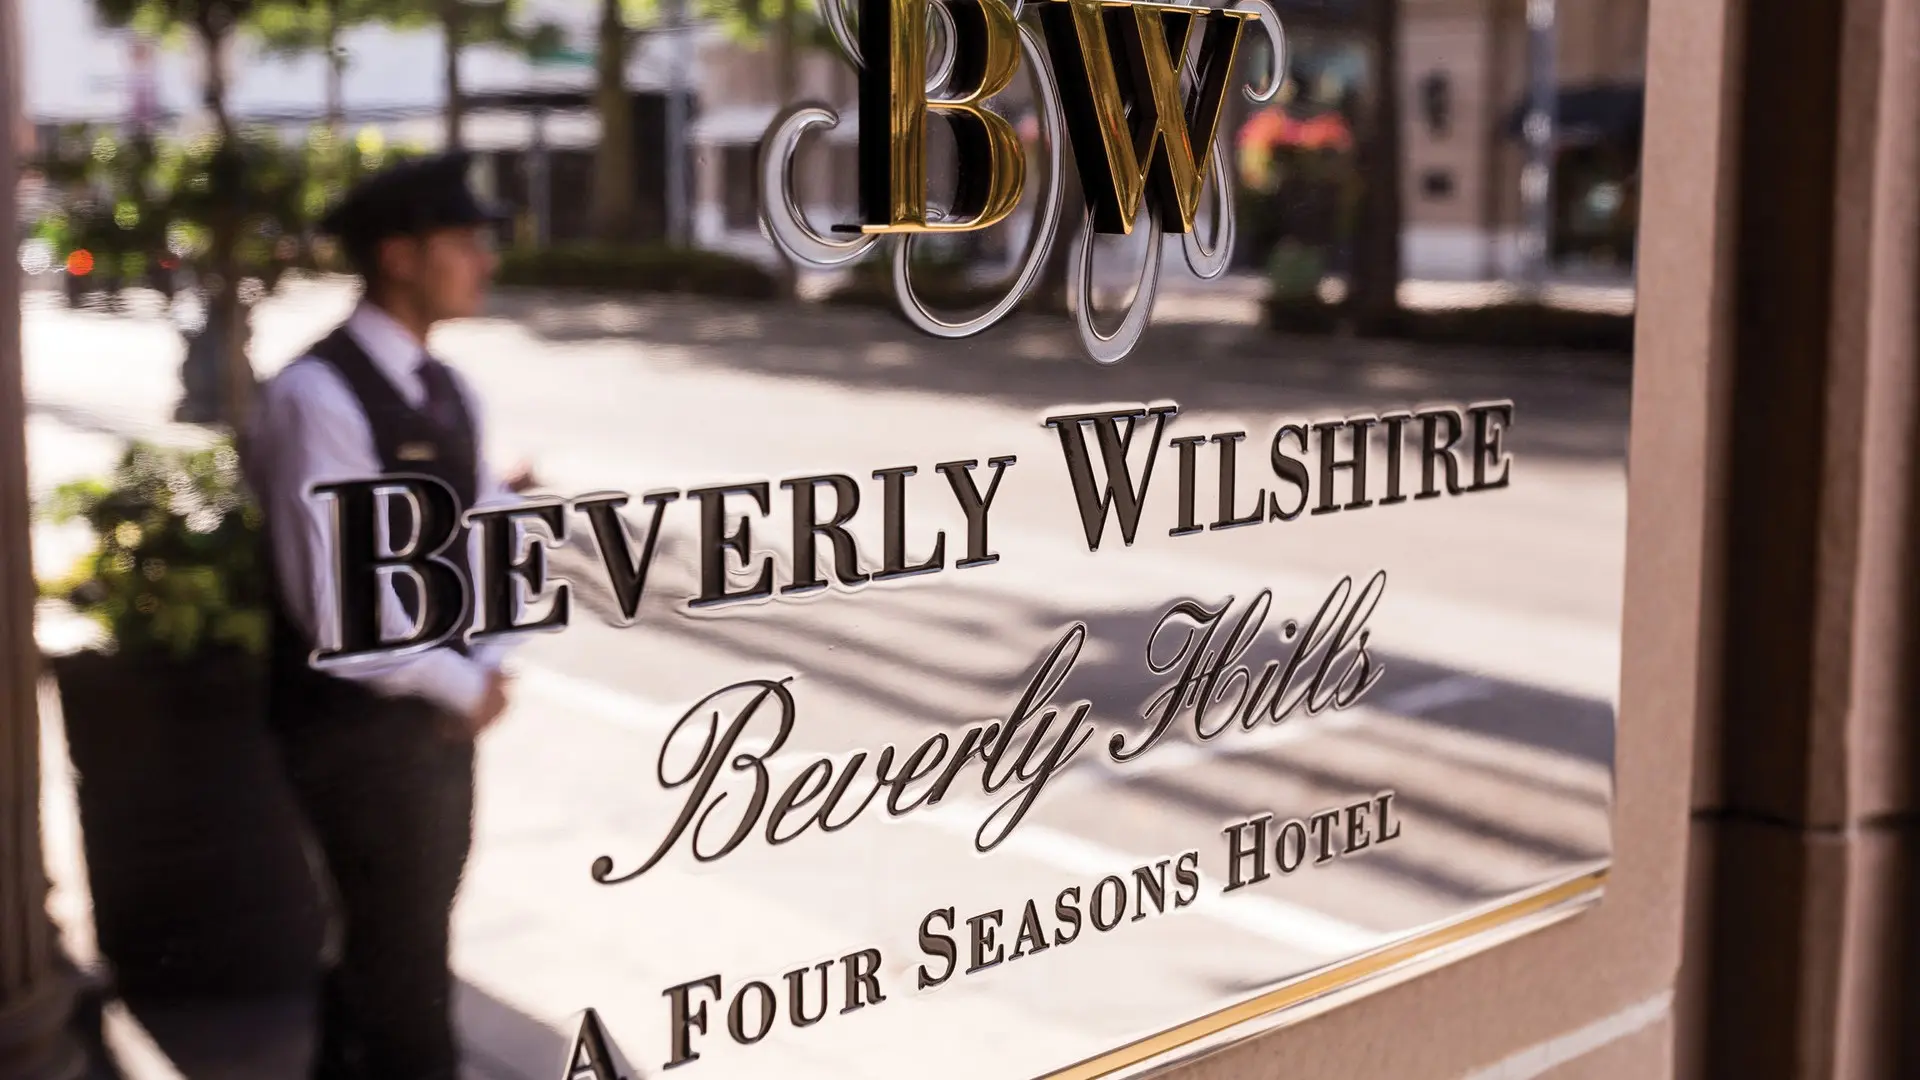 Hotel review What We Love' - Beverly Wilshire, A Four Seasons Hotel - 3